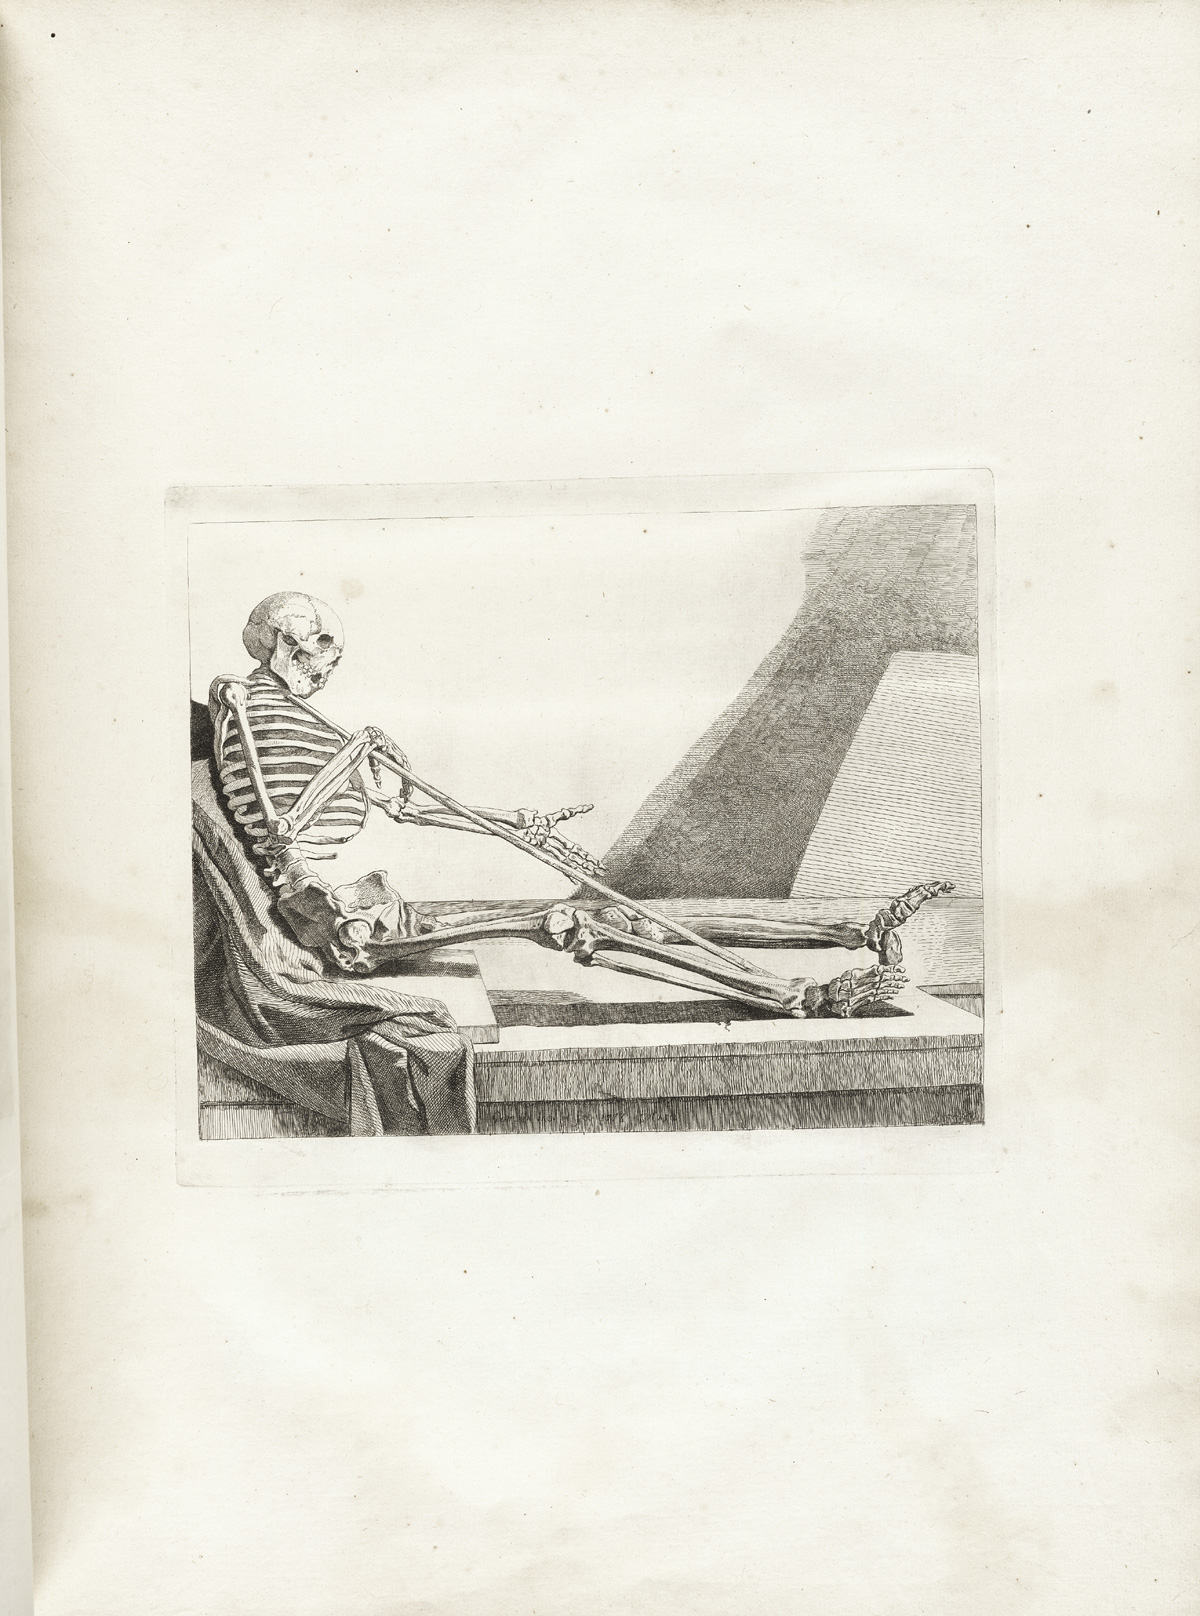 Engraving of a skeleton seated upright, viewed from the side, on a marble slab facing the right side of the page, from Jacques Gamelin’s Nouveau recueil d’osteologie et de myologie, NLM Call no.: WZ 260 G178m 1779.